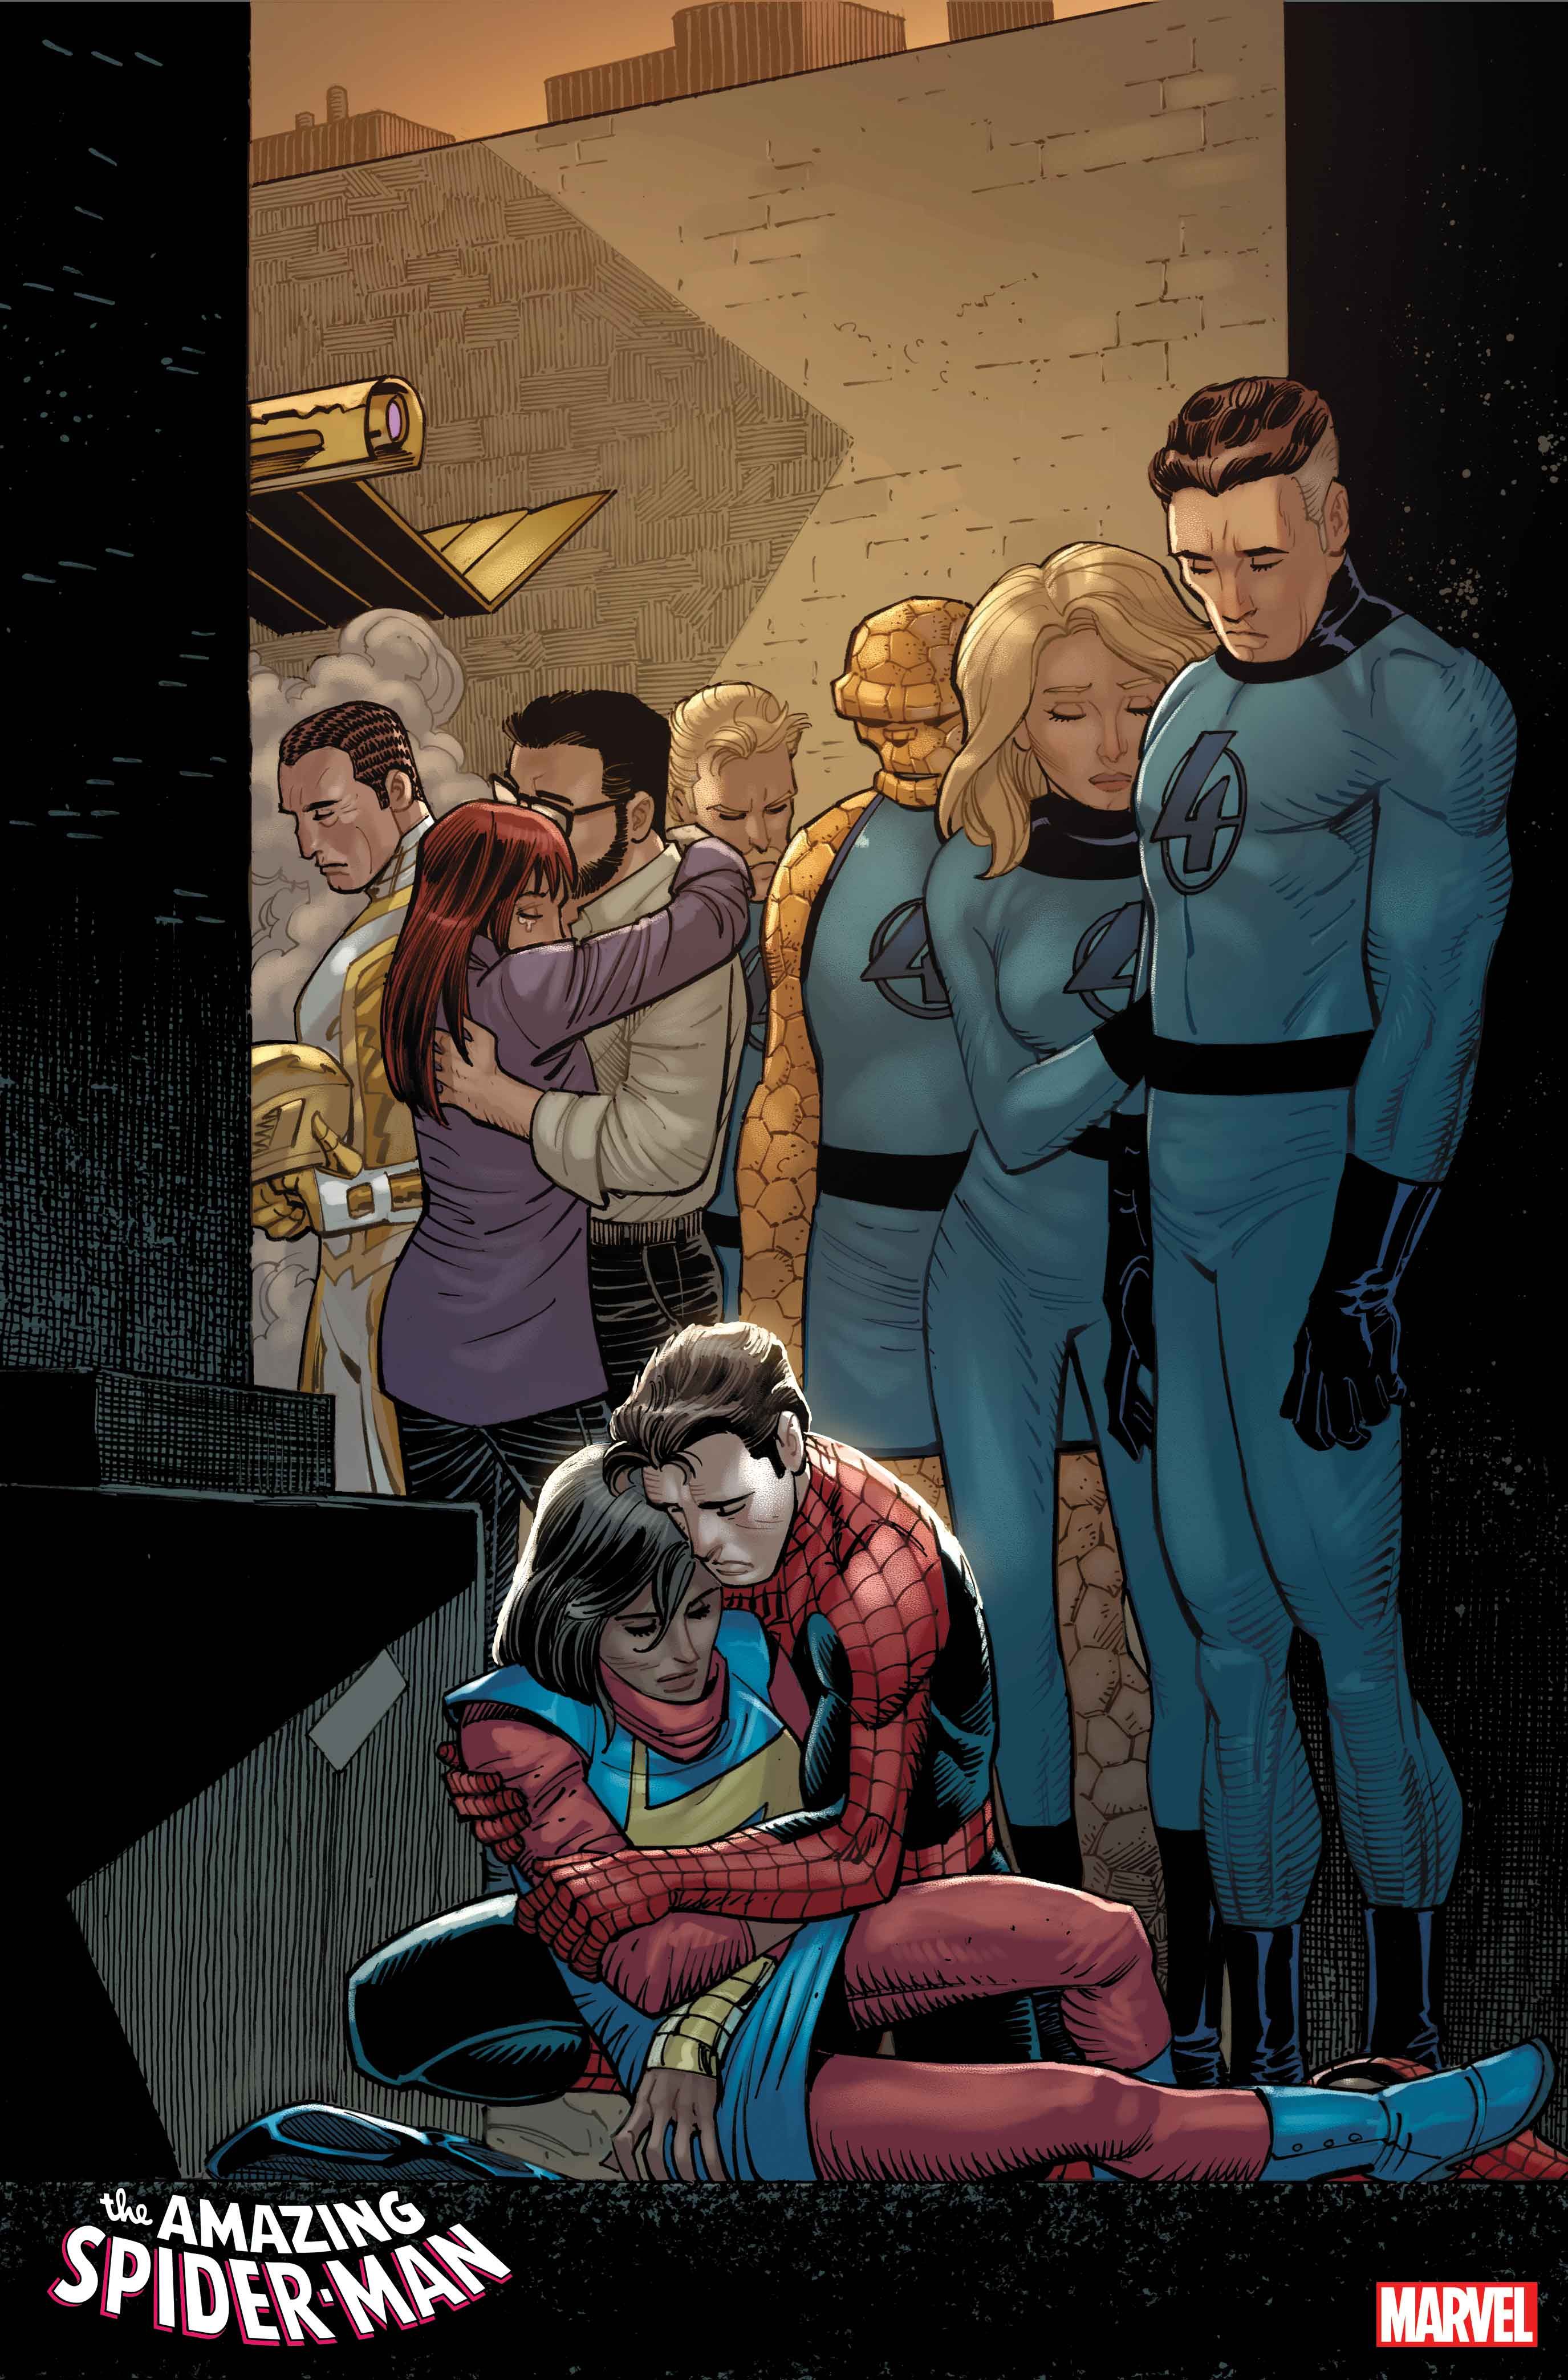 peter parker holding a deceased ms marvel surrounded by fellow heroes and loved ones